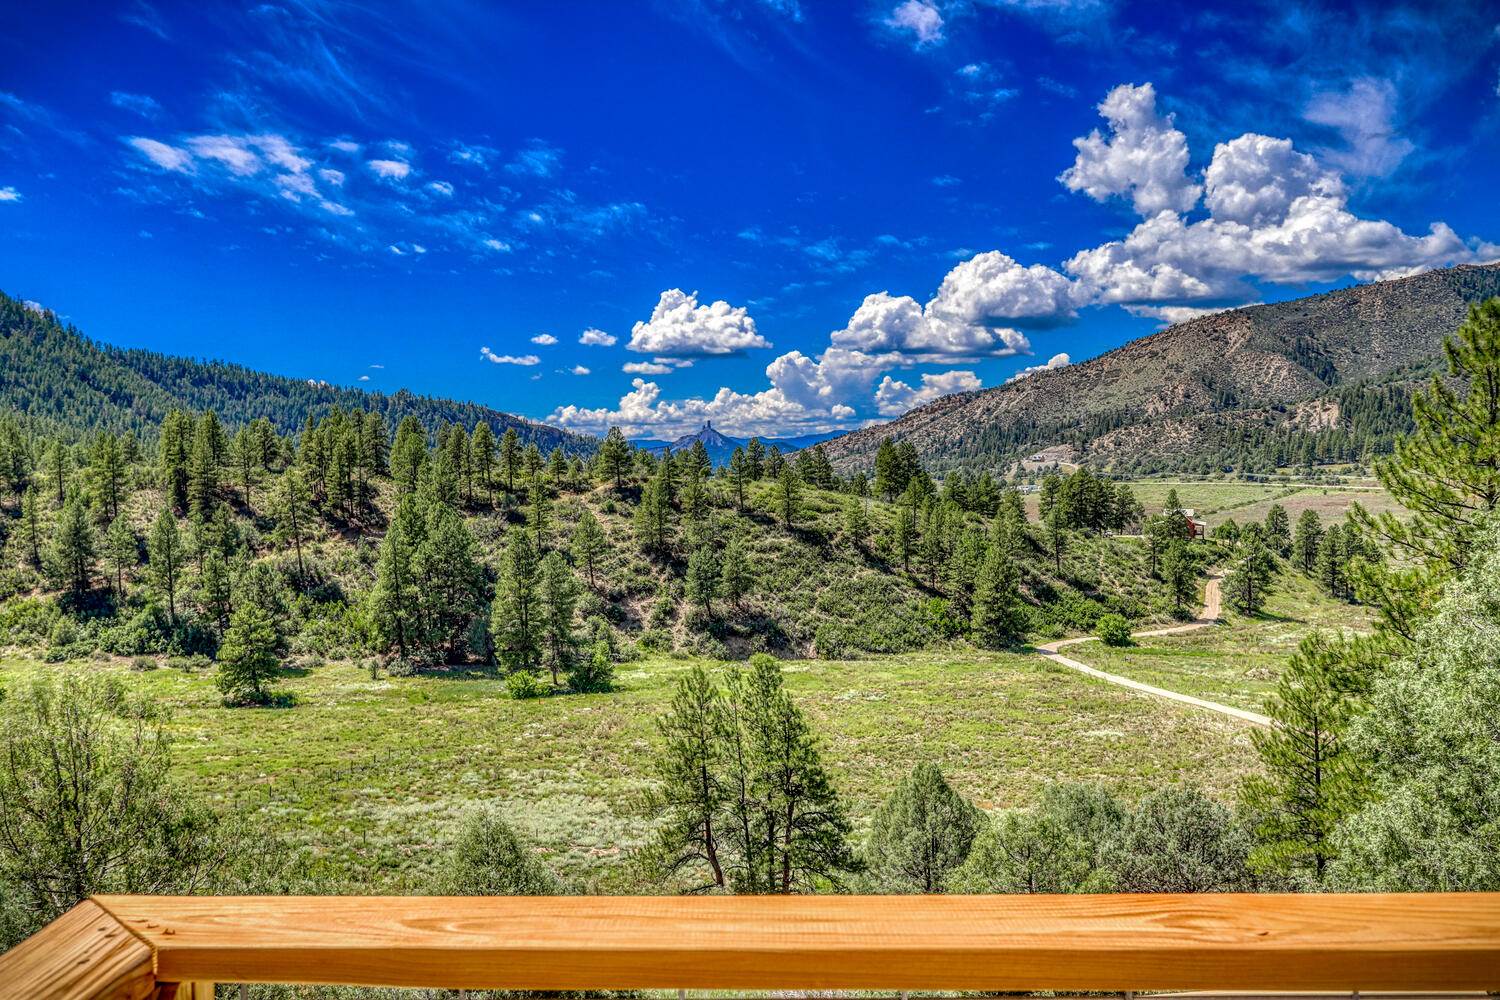 Chimney Rock Retreat, #1563 County Road 700 - ST, Pagosa Springs, CO 81147